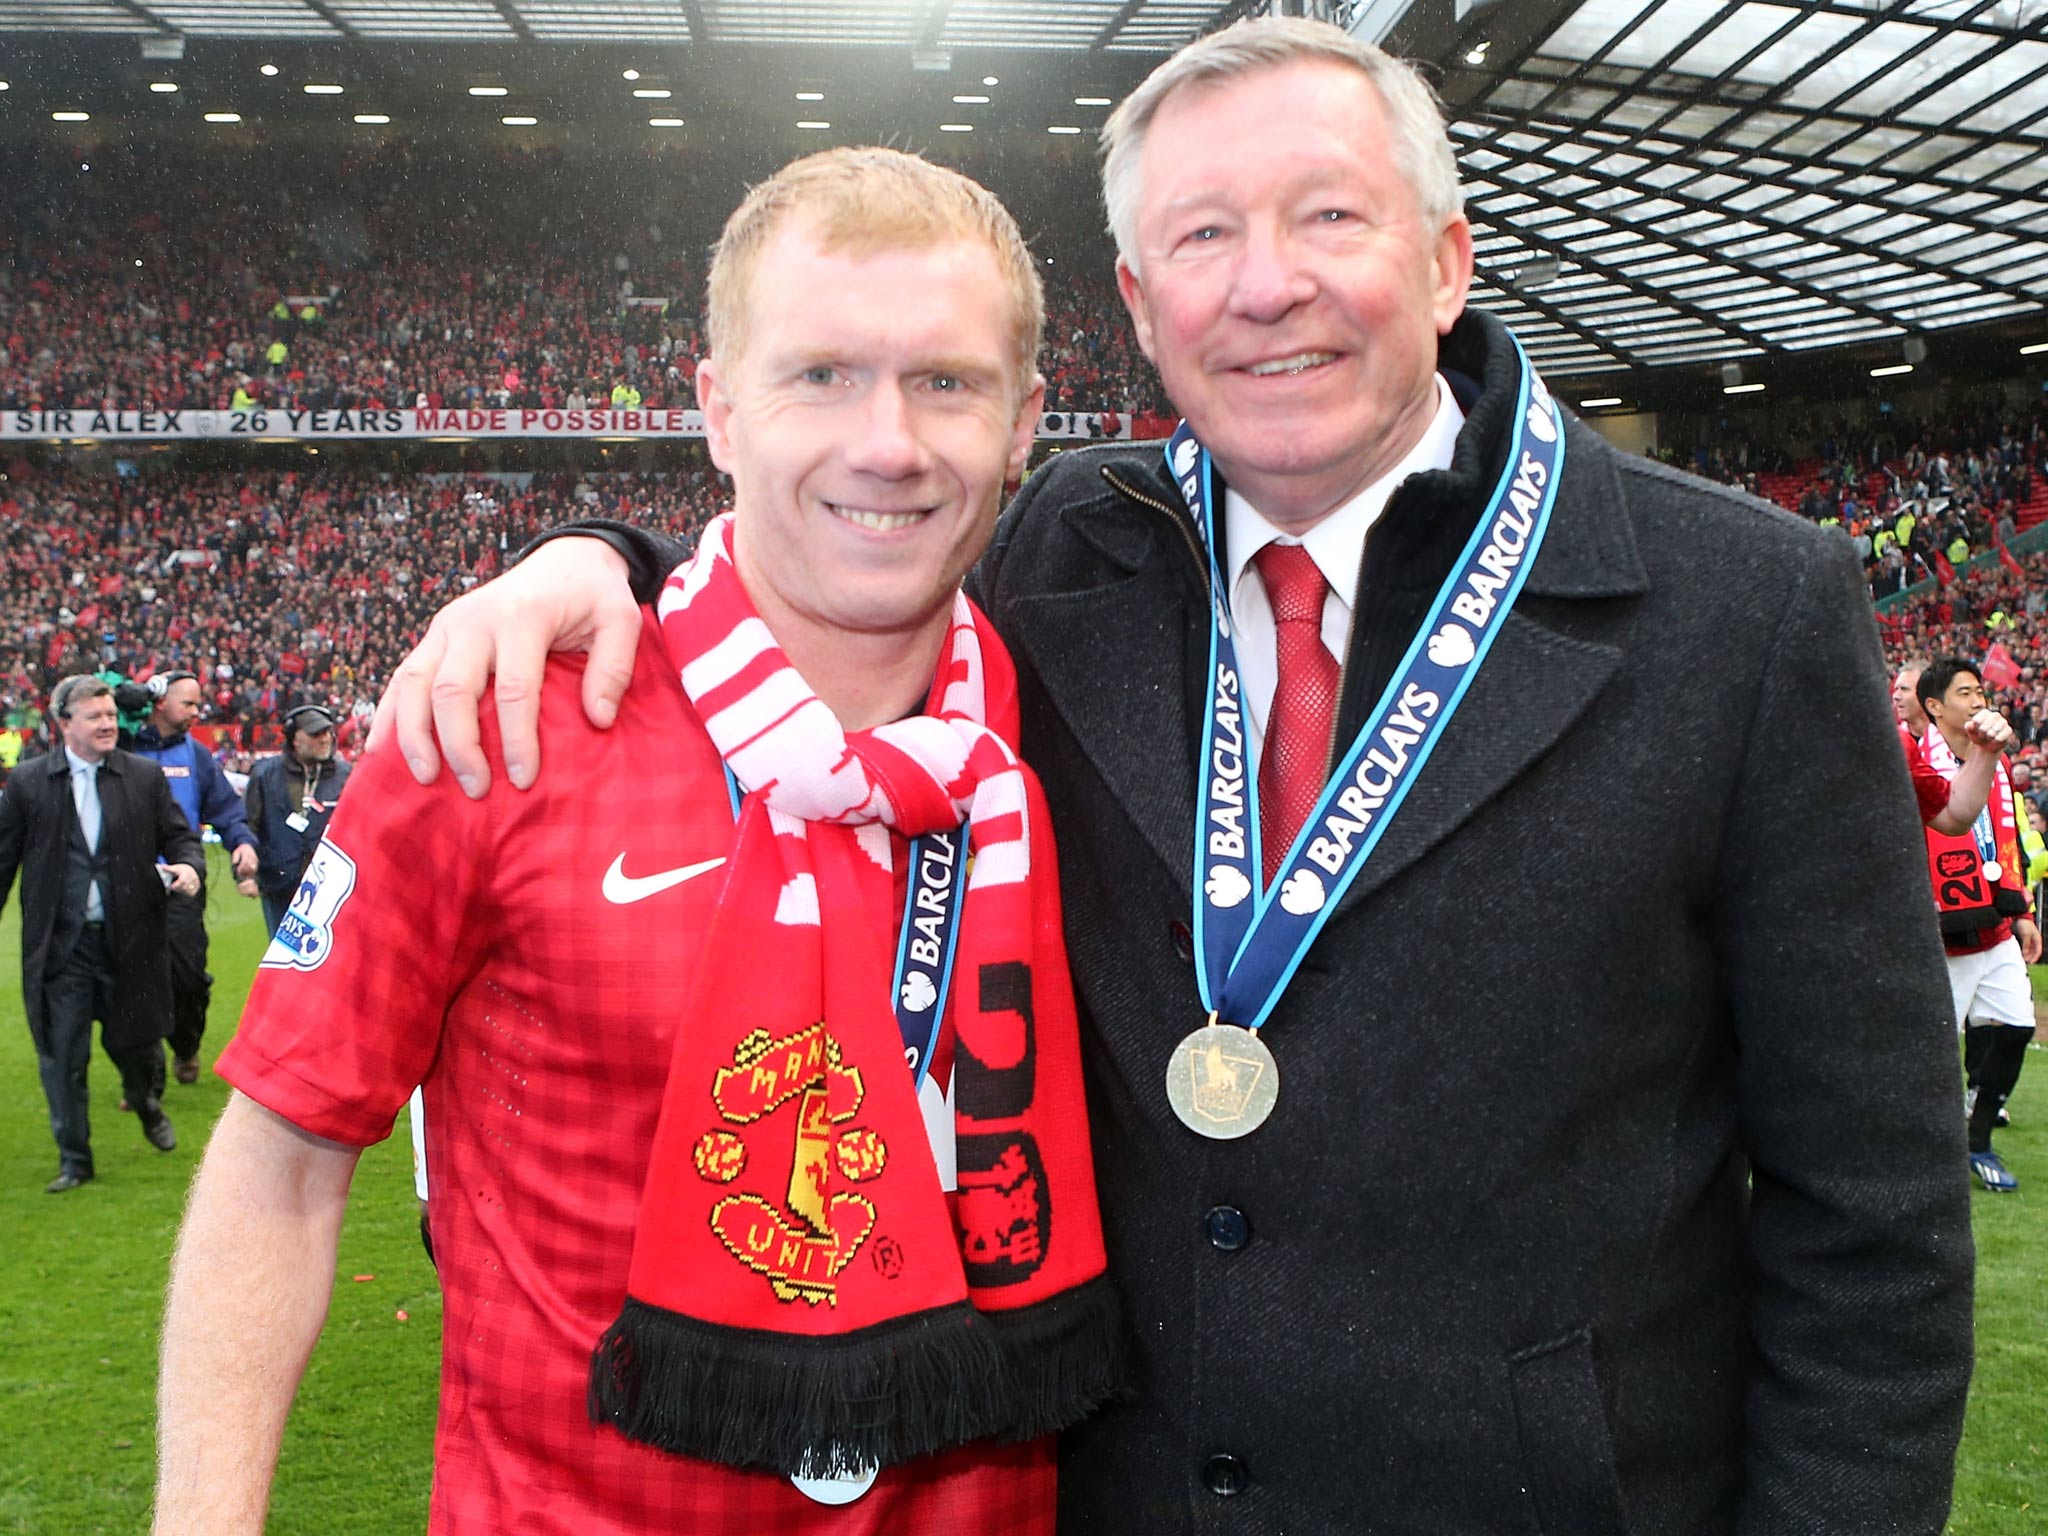 Paul Scholes celebrates with manager Sir Alex Ferguson as both prepare to retire from the game